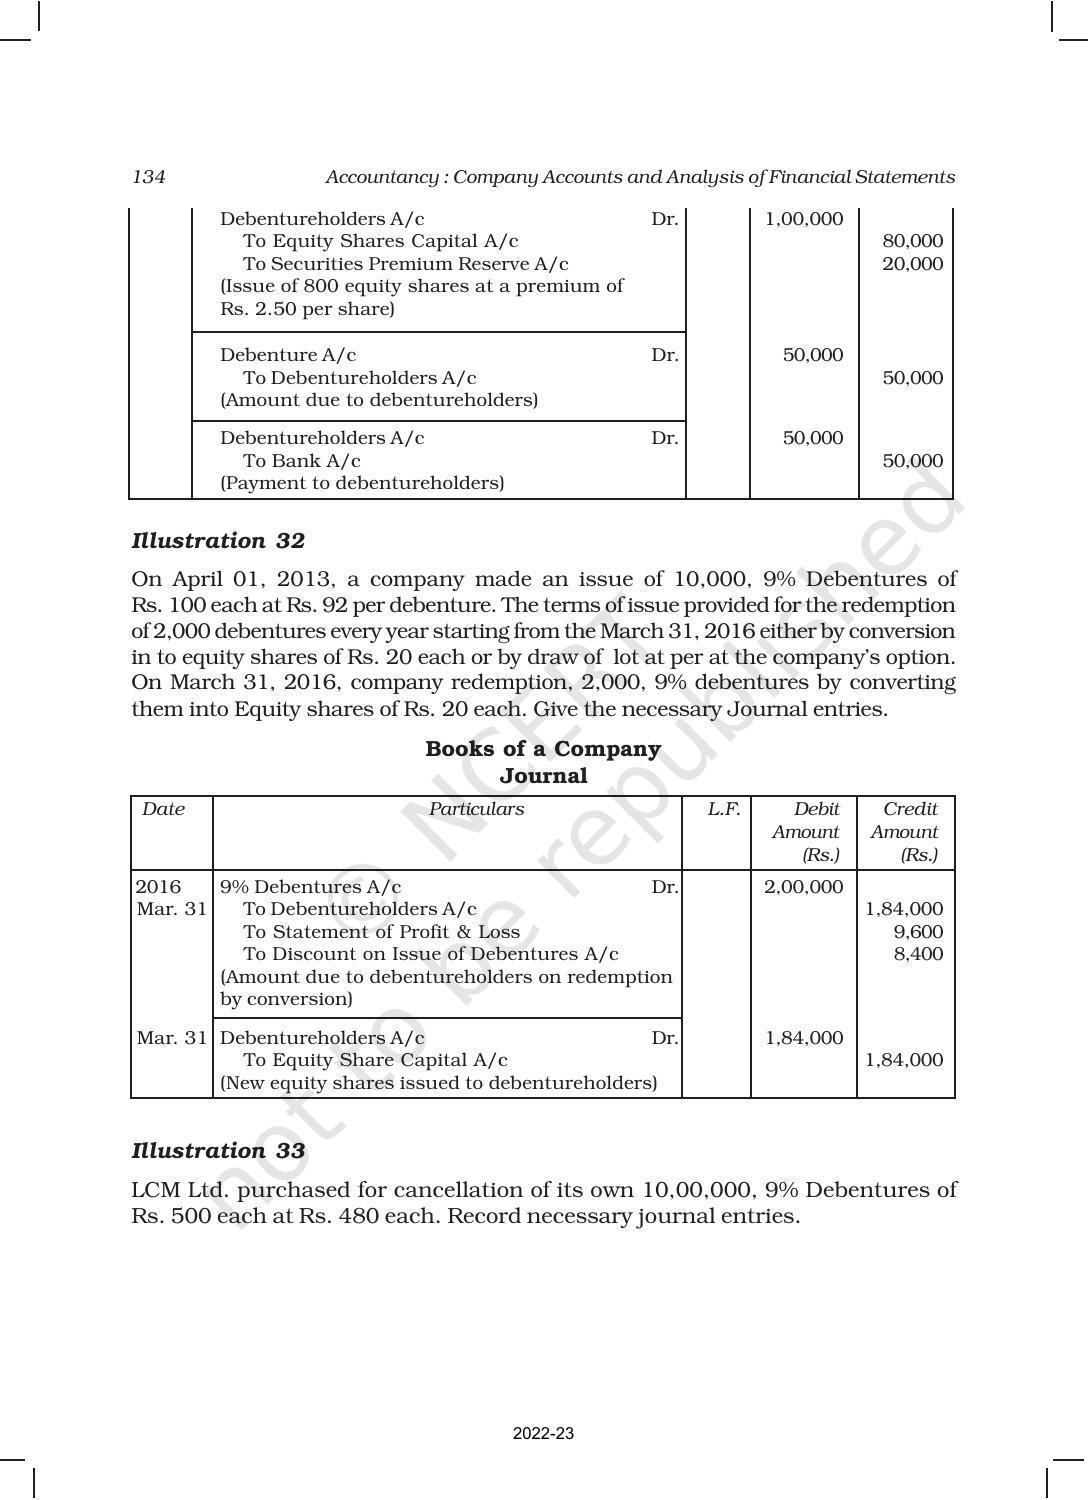 NCERT Book for Class 12 Accountancy Part II Chapter 1 Issue and Redemption of Debentures - Page 60